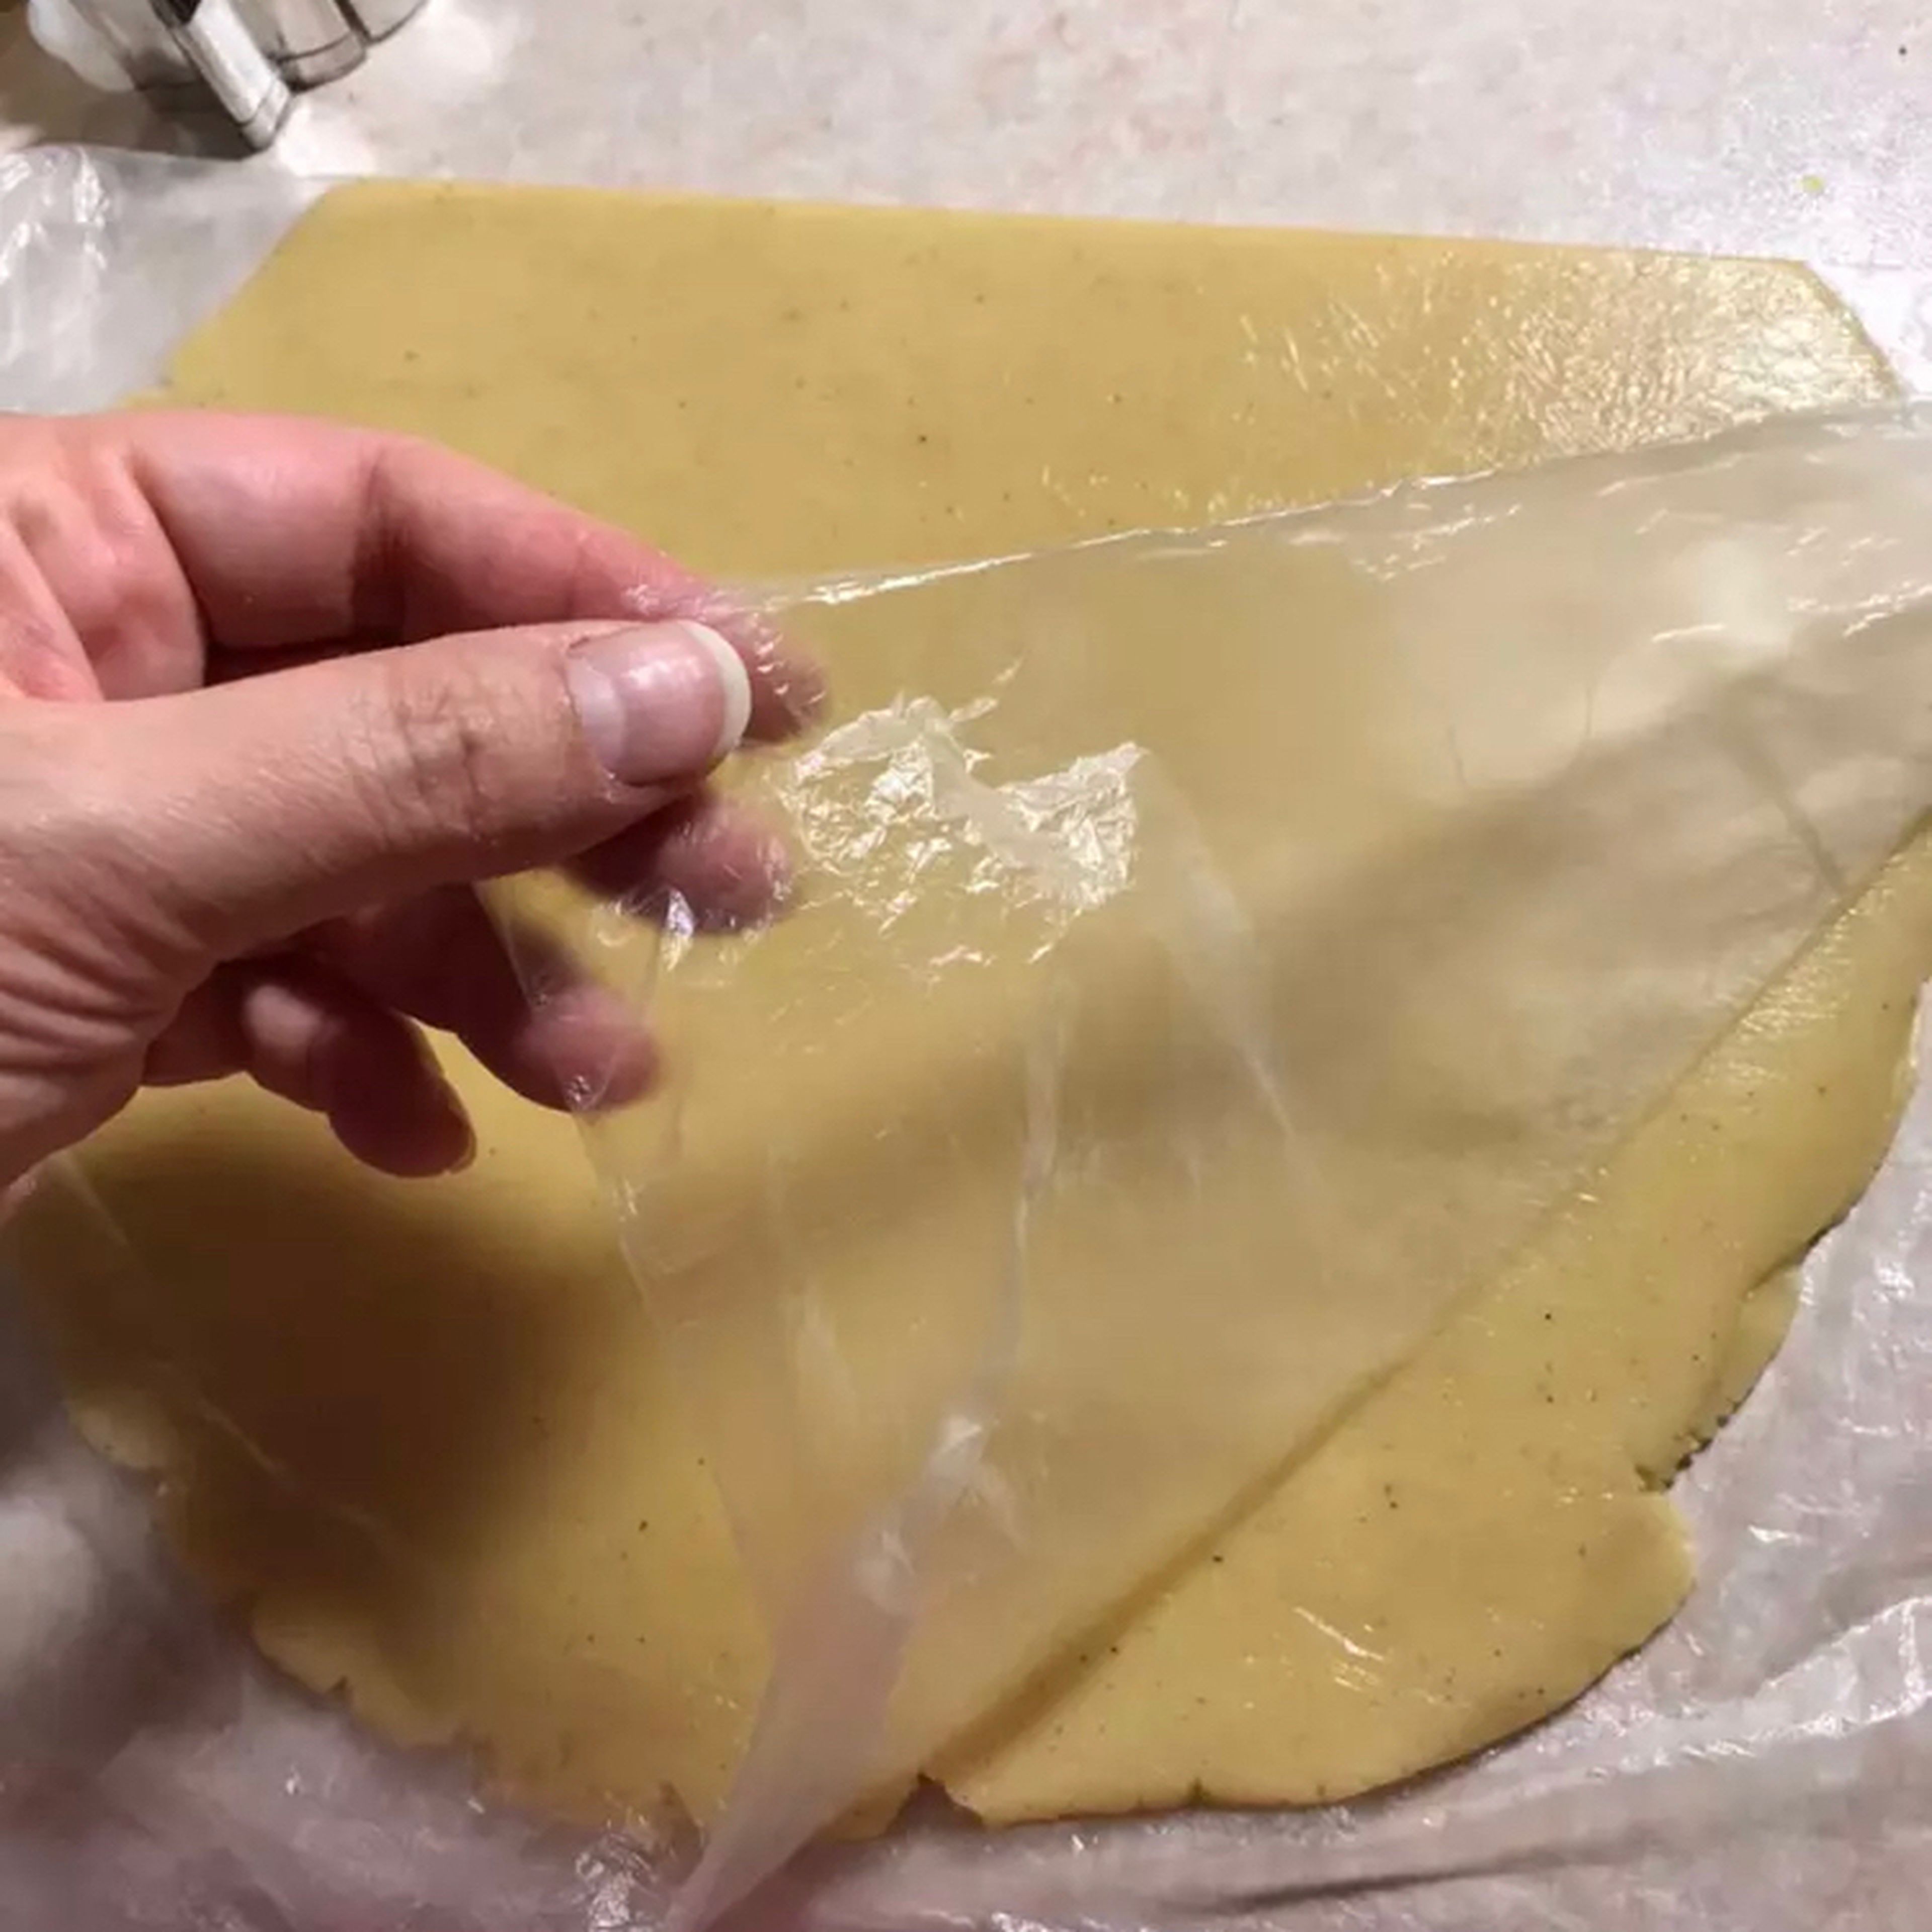 Place a part of the dough between two layers of plastic bag and open with a rolling pin to a thickness of 3 mm.